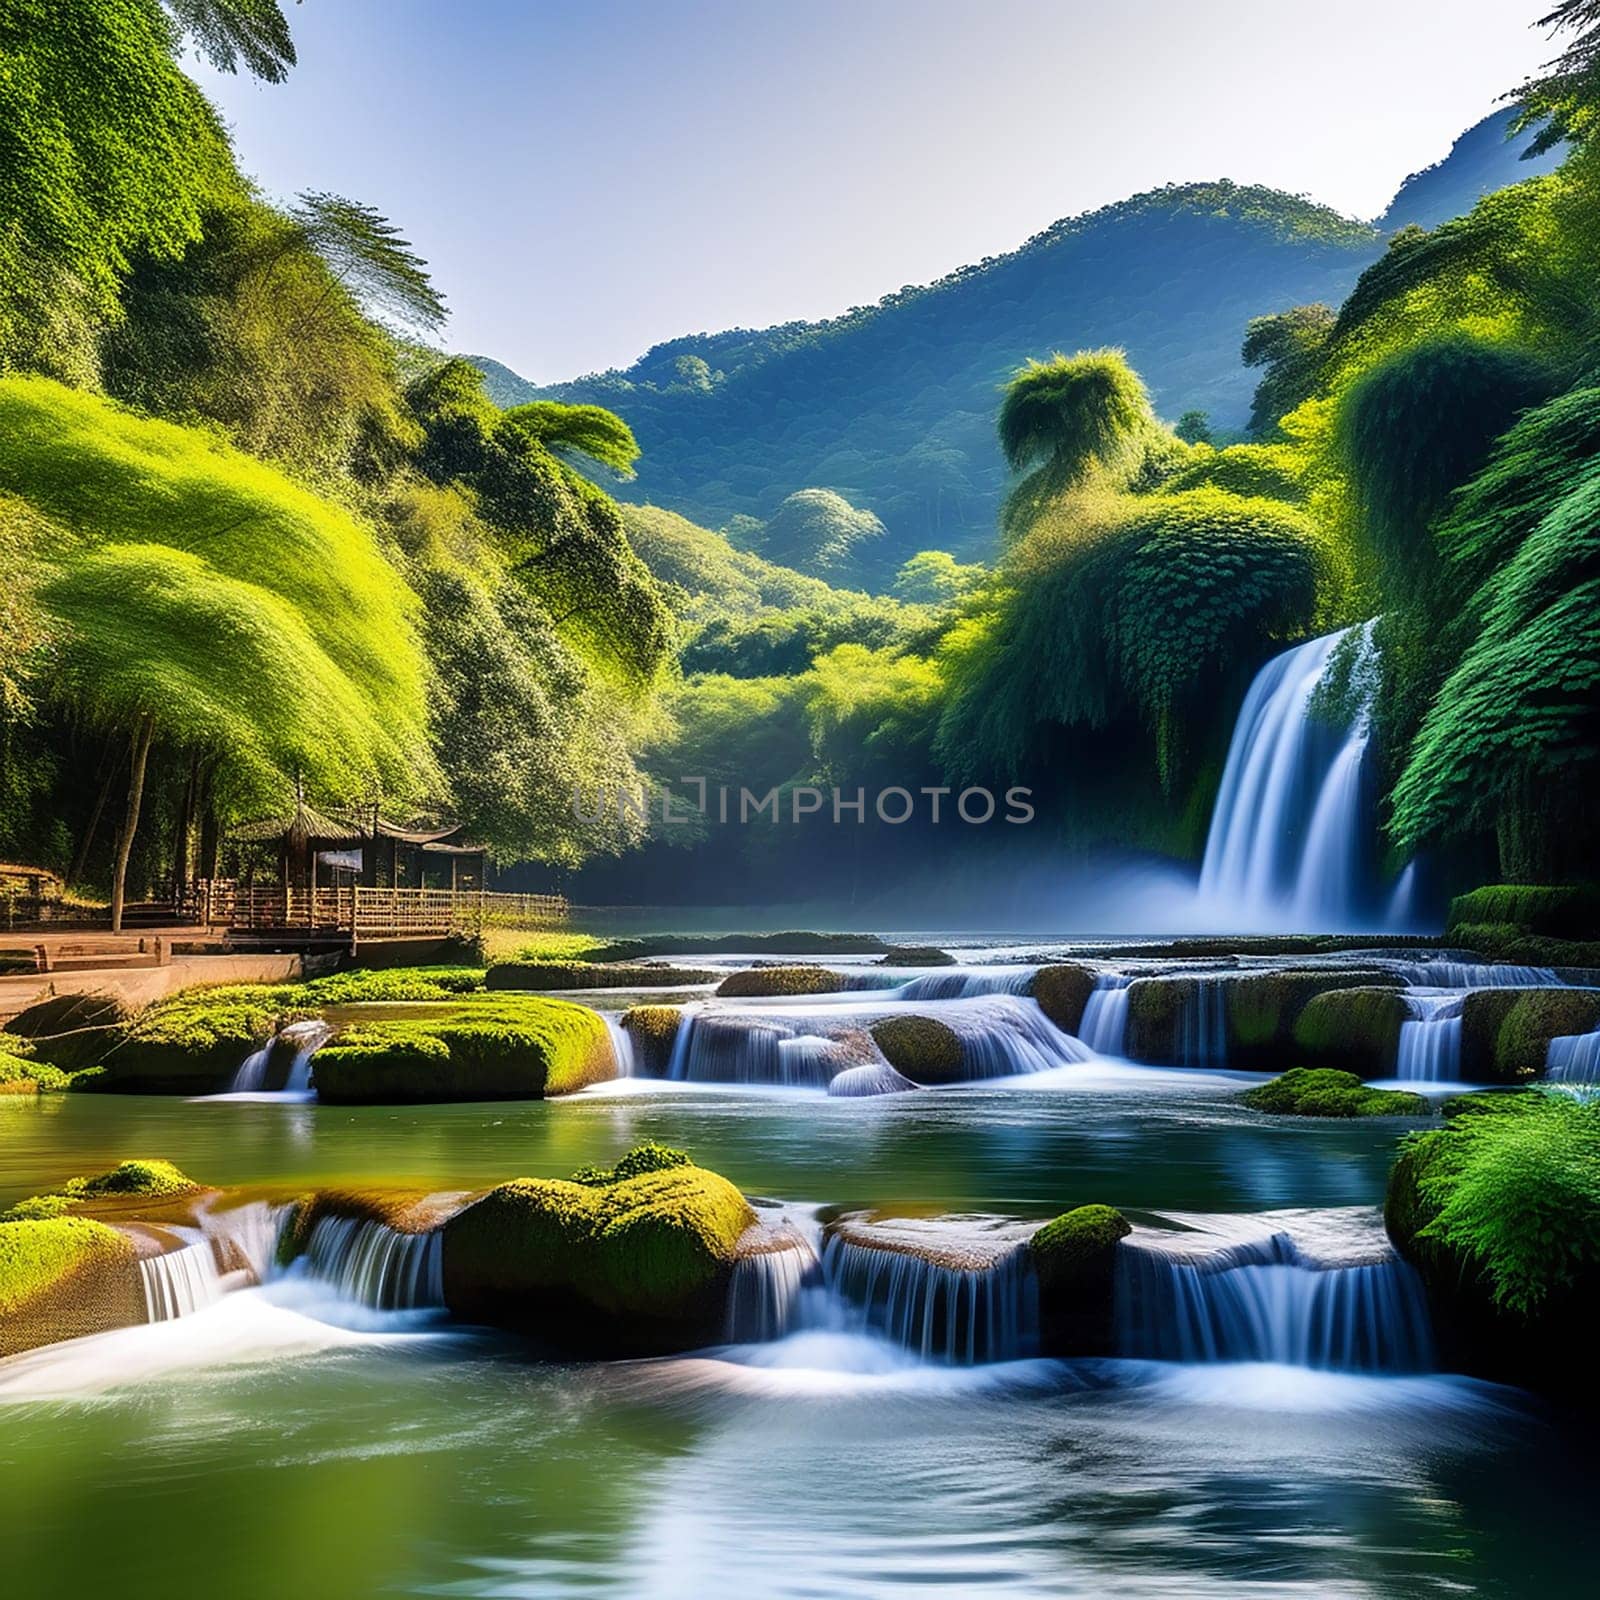 Spring's Delight: Exploring Mossy Falls and Verdant Landscapes by Petrichor